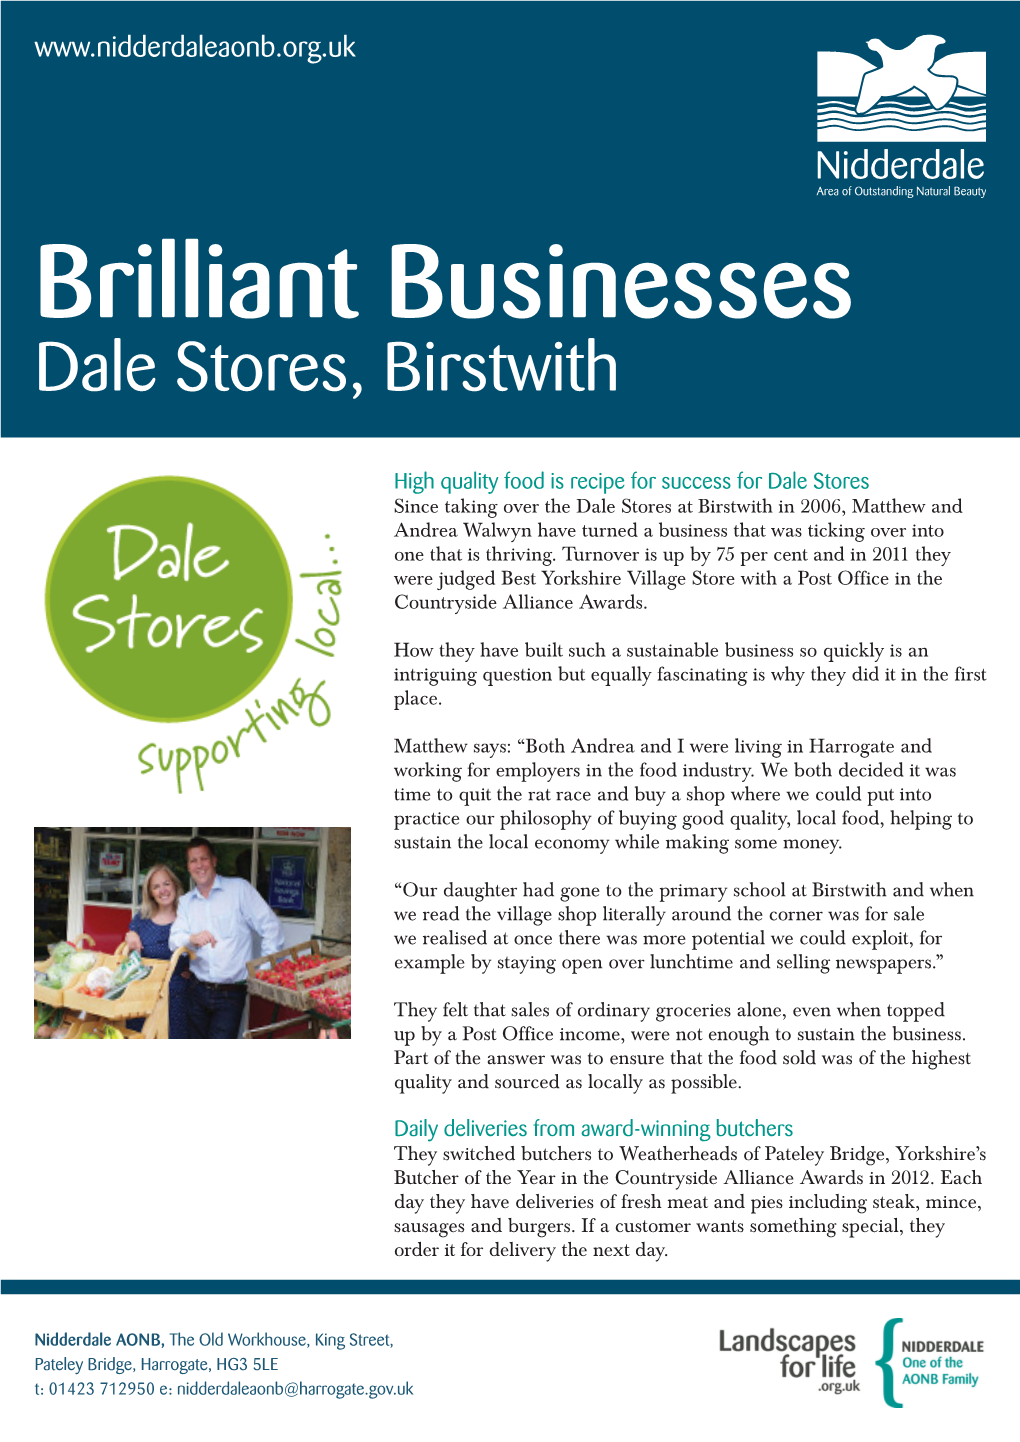 Brilliant Businesses Dale Stores, Birstwith